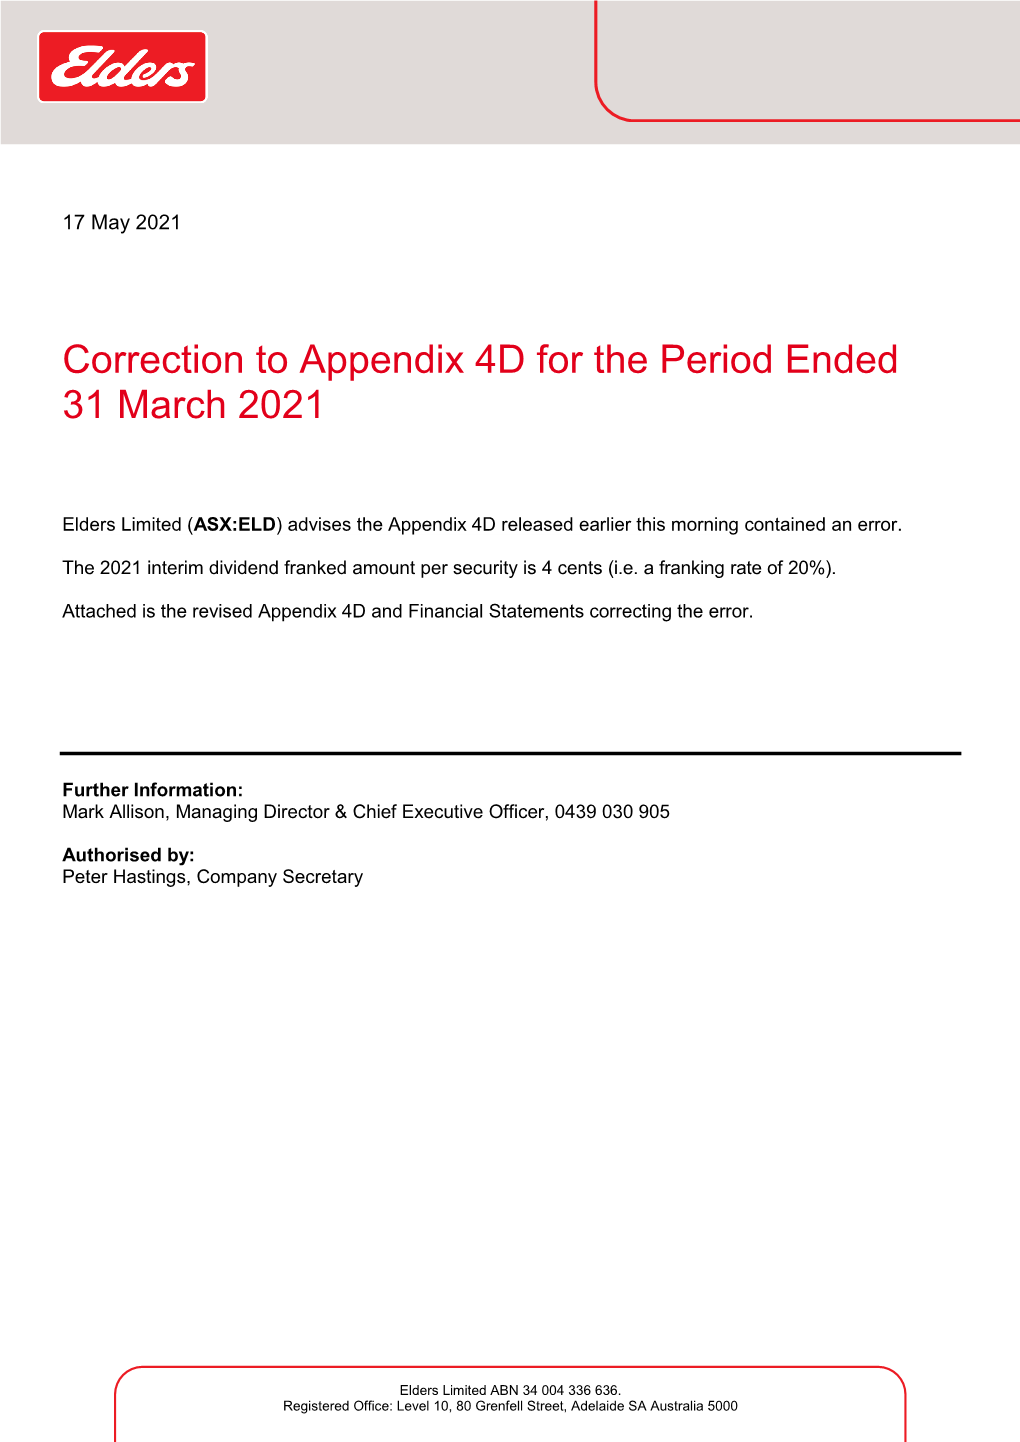 Correction to Appendix 4D for the Period Ended 31 March 2021